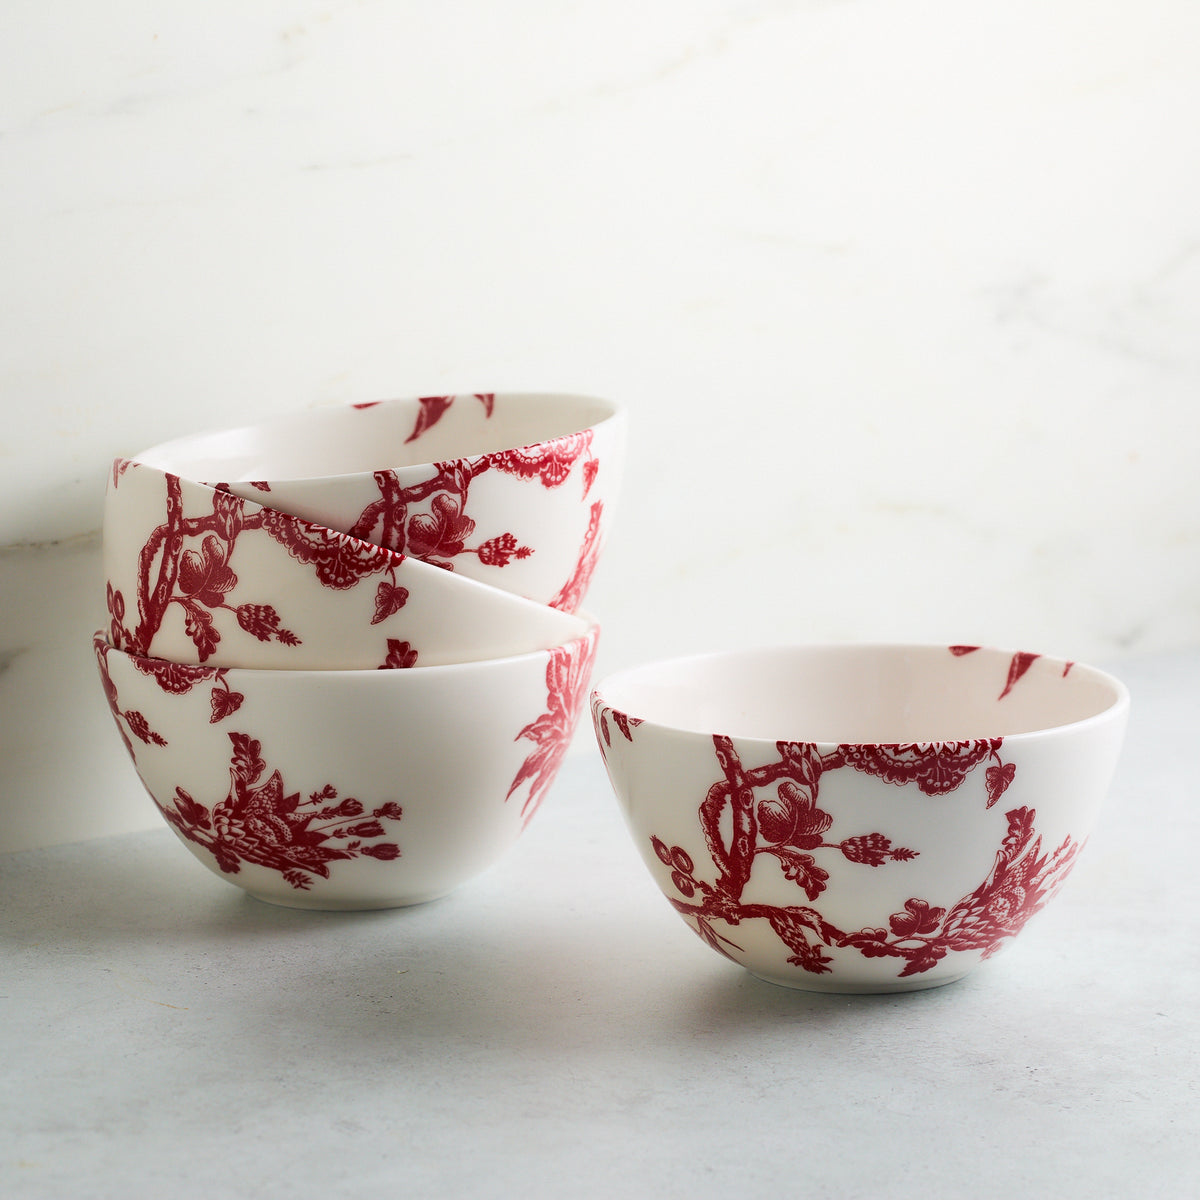 Three white porcelain bowls with red ornate designs are stacked, next to a fourth identical Arcadia Crimson Cereal Bowl by Caskata on a white and grey surface with a light background, showcasing the elegance of premium porcelain dinnerware inspired by the Williamsburg Foundation.